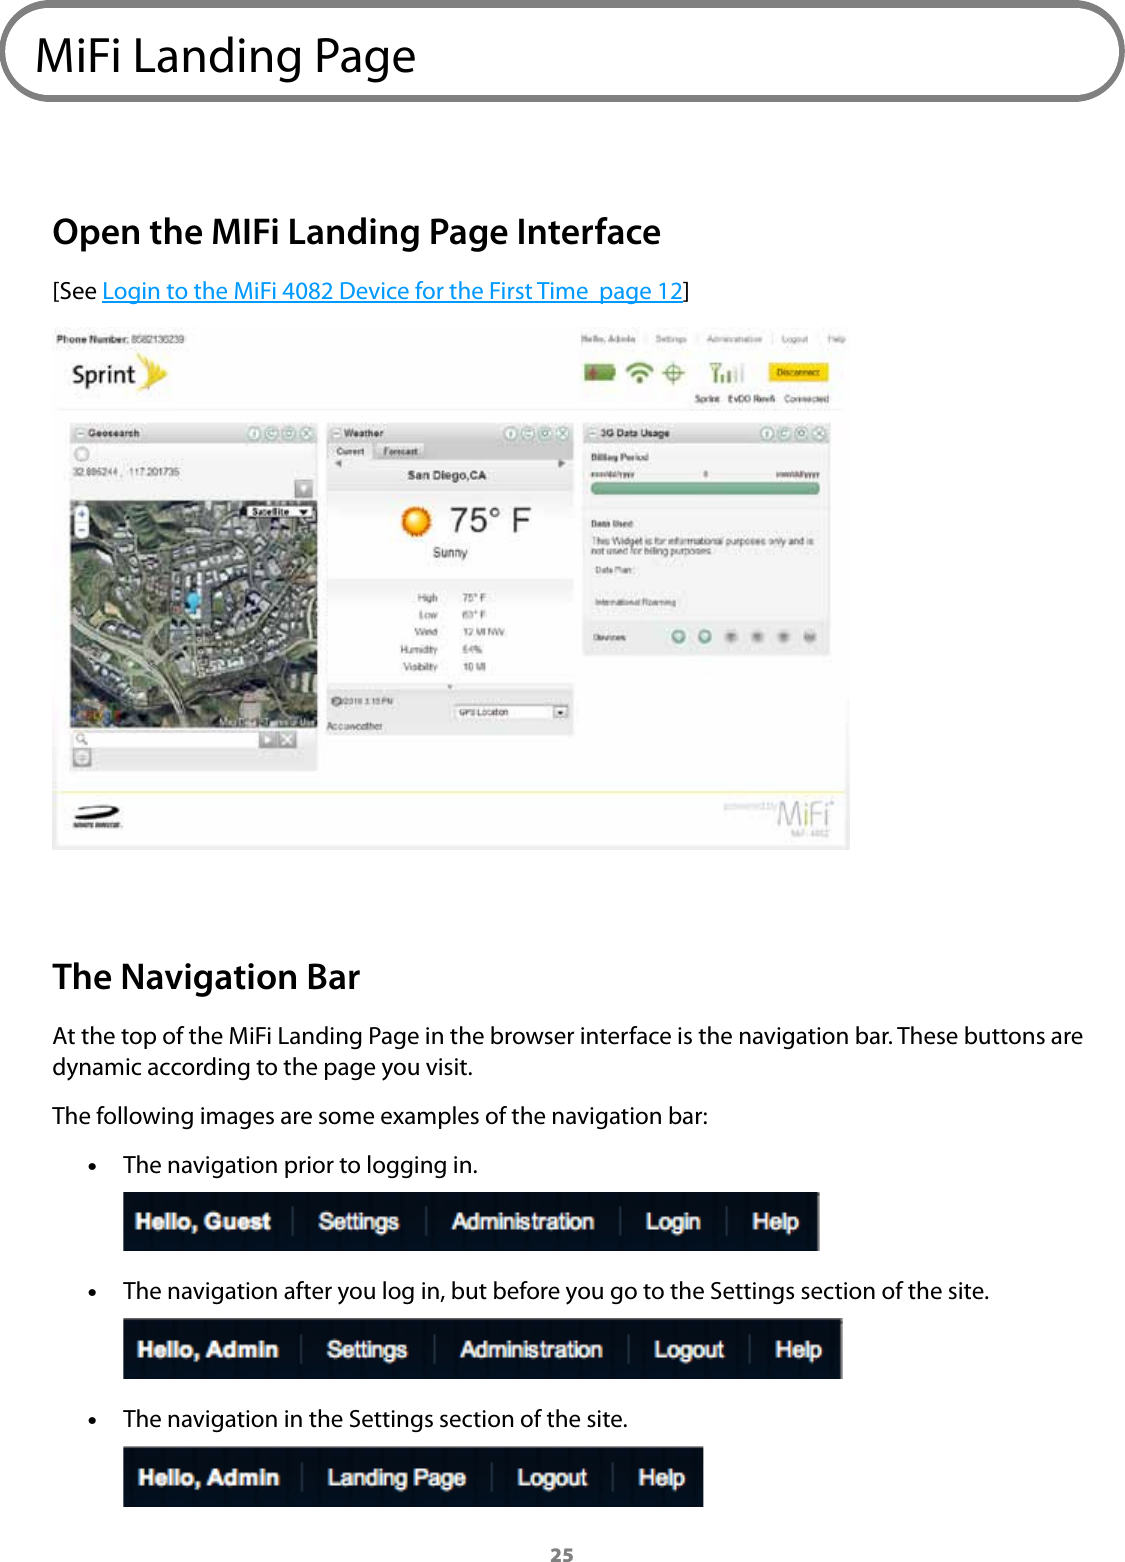 25MiFi Landing PageOpen the MIFi Landing Page Interface[See Login to the MiFi 4082 Device for the First Time  page 12]The Navigation BarAt the top of the MiFi Landing Page in the browser interface is the navigation bar. These buttons are dynamic according to the page you visit. The following images are some examples of the navigation bar: •The navigation prior to logging in. •The navigation after you log in, but before you go to the Settings section of the site. •The navigation in the Settings section of the site.